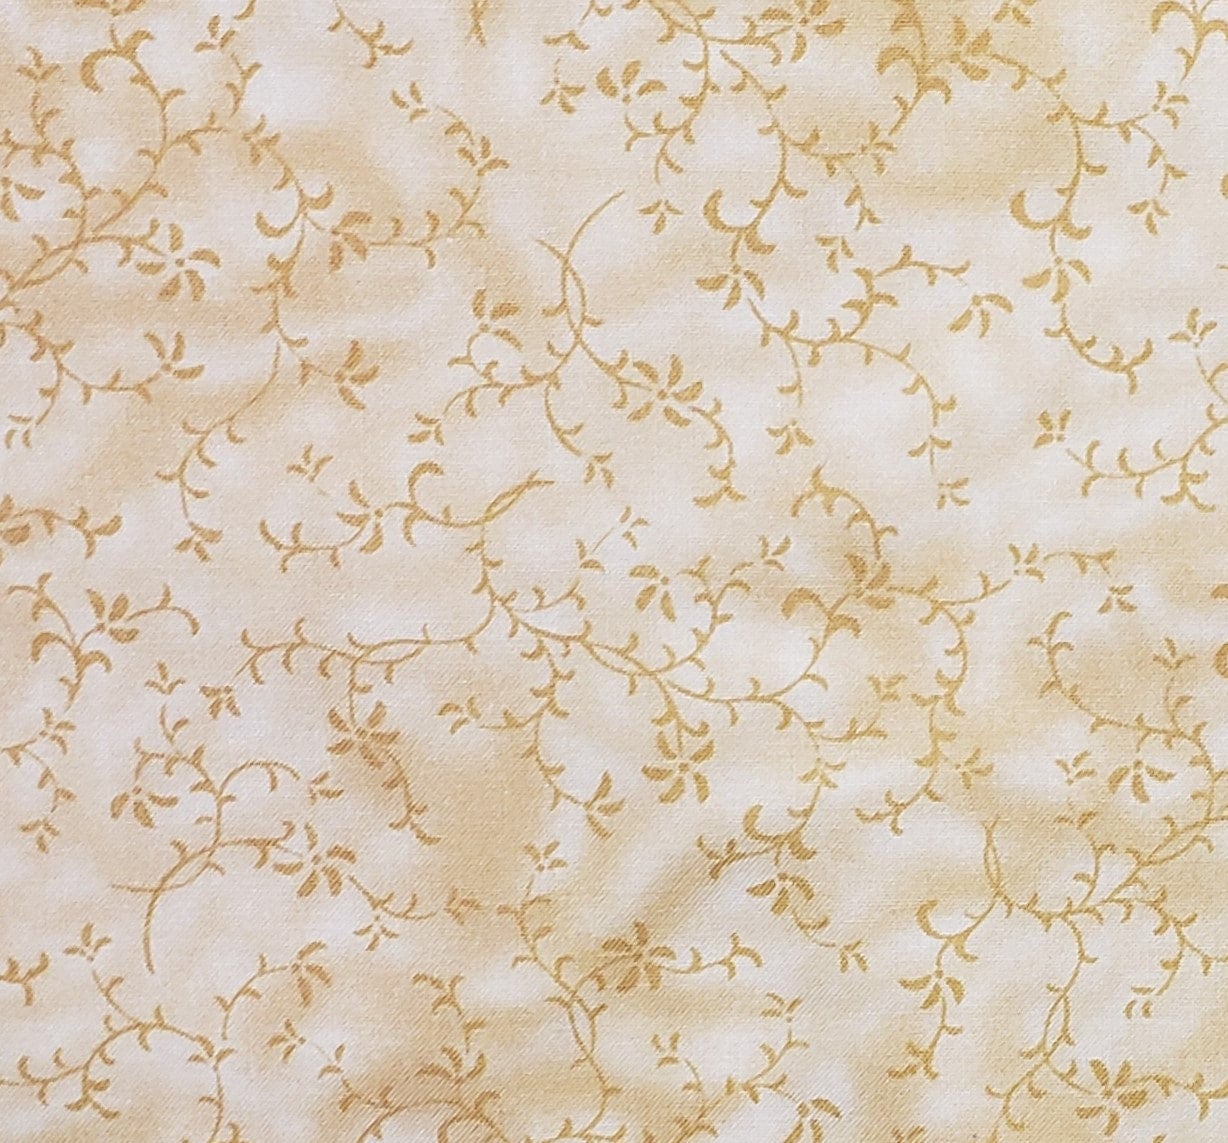 Exclusively for Jo-Ann Stores, Inc. - Tan Tonal Fabric with Tone-on-Tone Vine Print